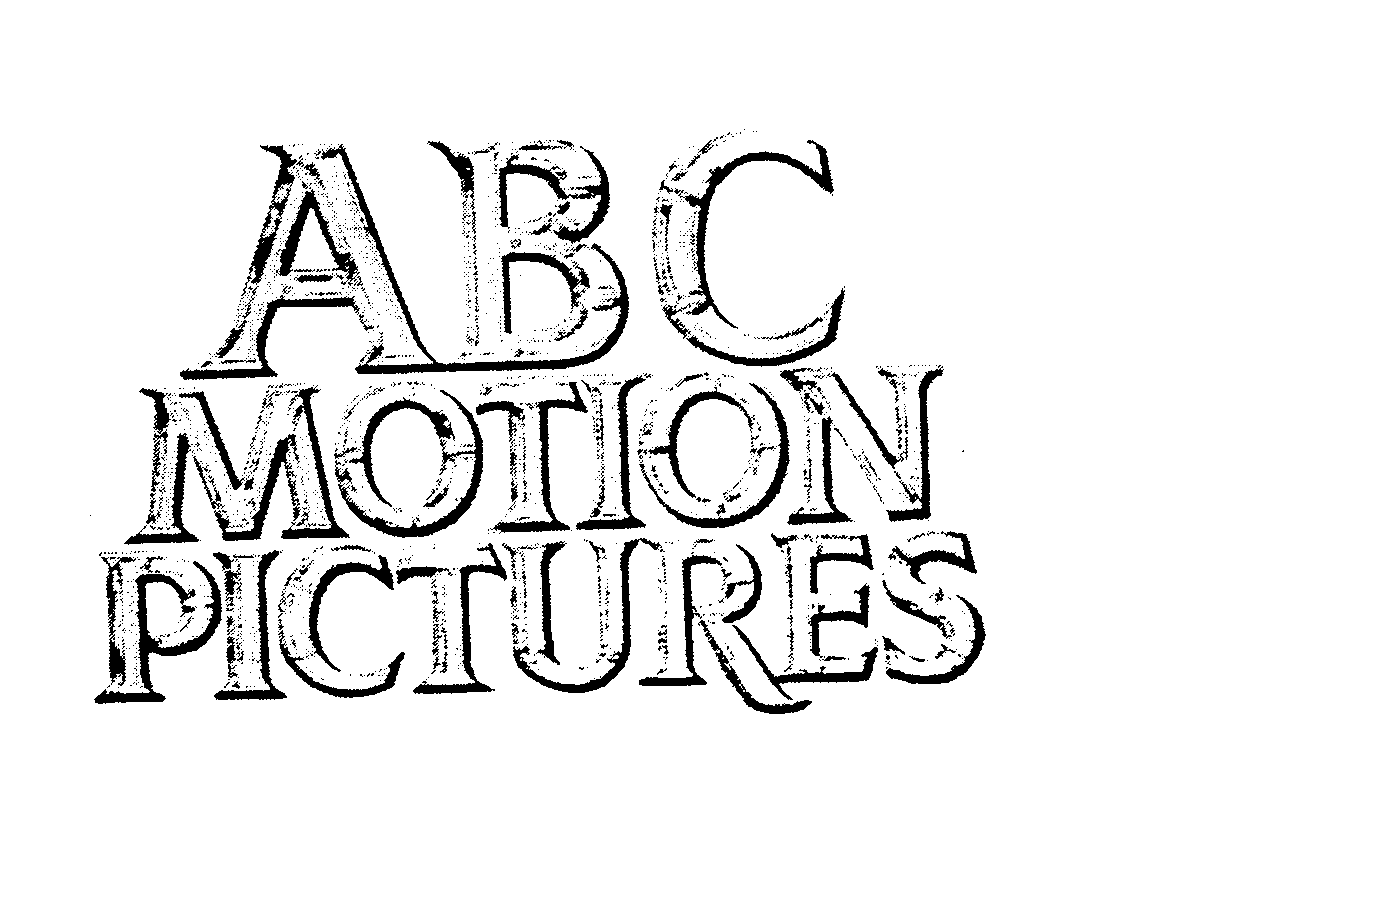 ABC MOTION PICTURES